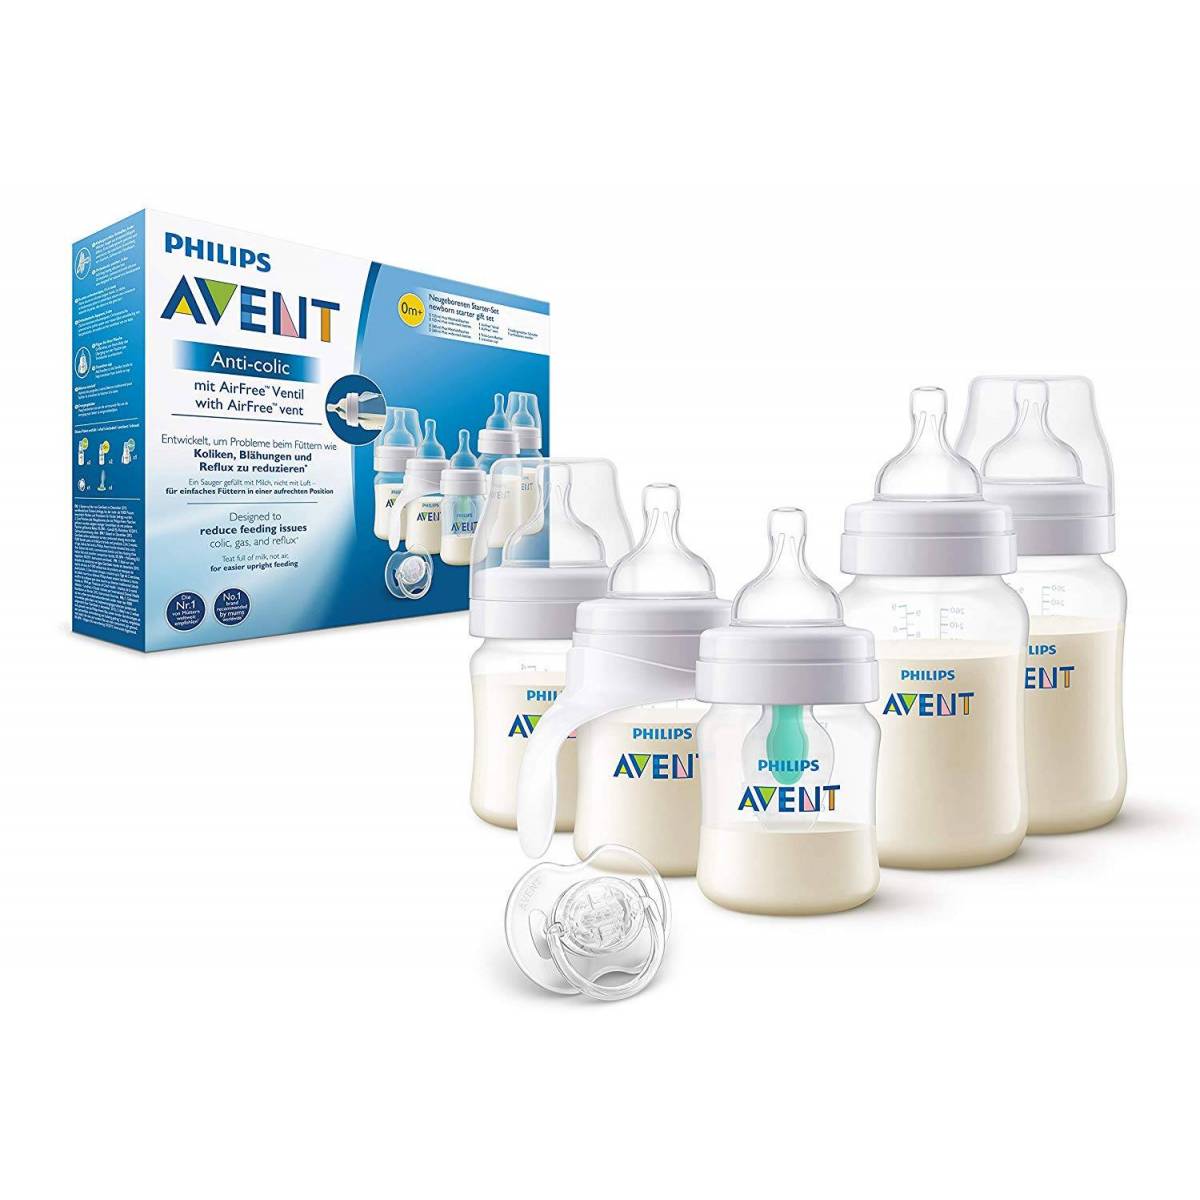 https://www.maxxidiscount.com/9431-large_default/philips-avent-anti-colic-scalable-baby-bottle-box.jpg